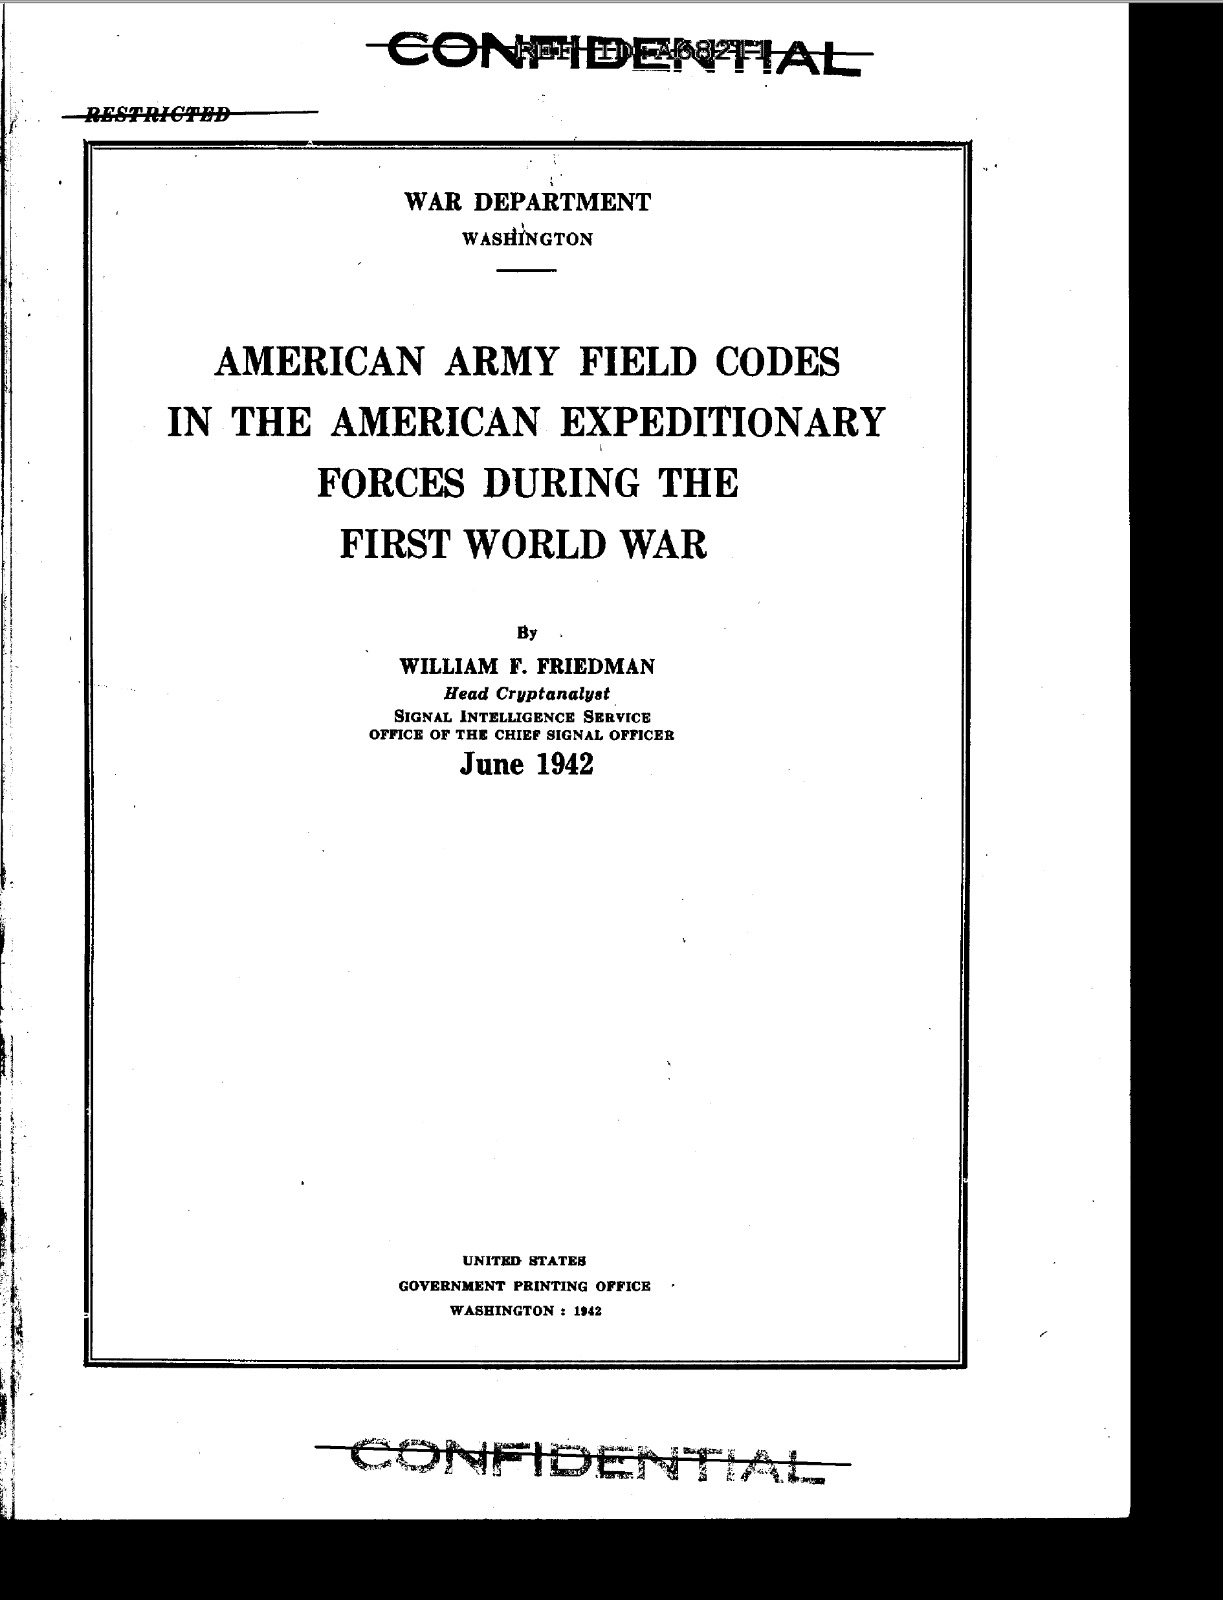 264 Page 1942 American Army Field Codes In the AEF During WWI Cryptography on CD